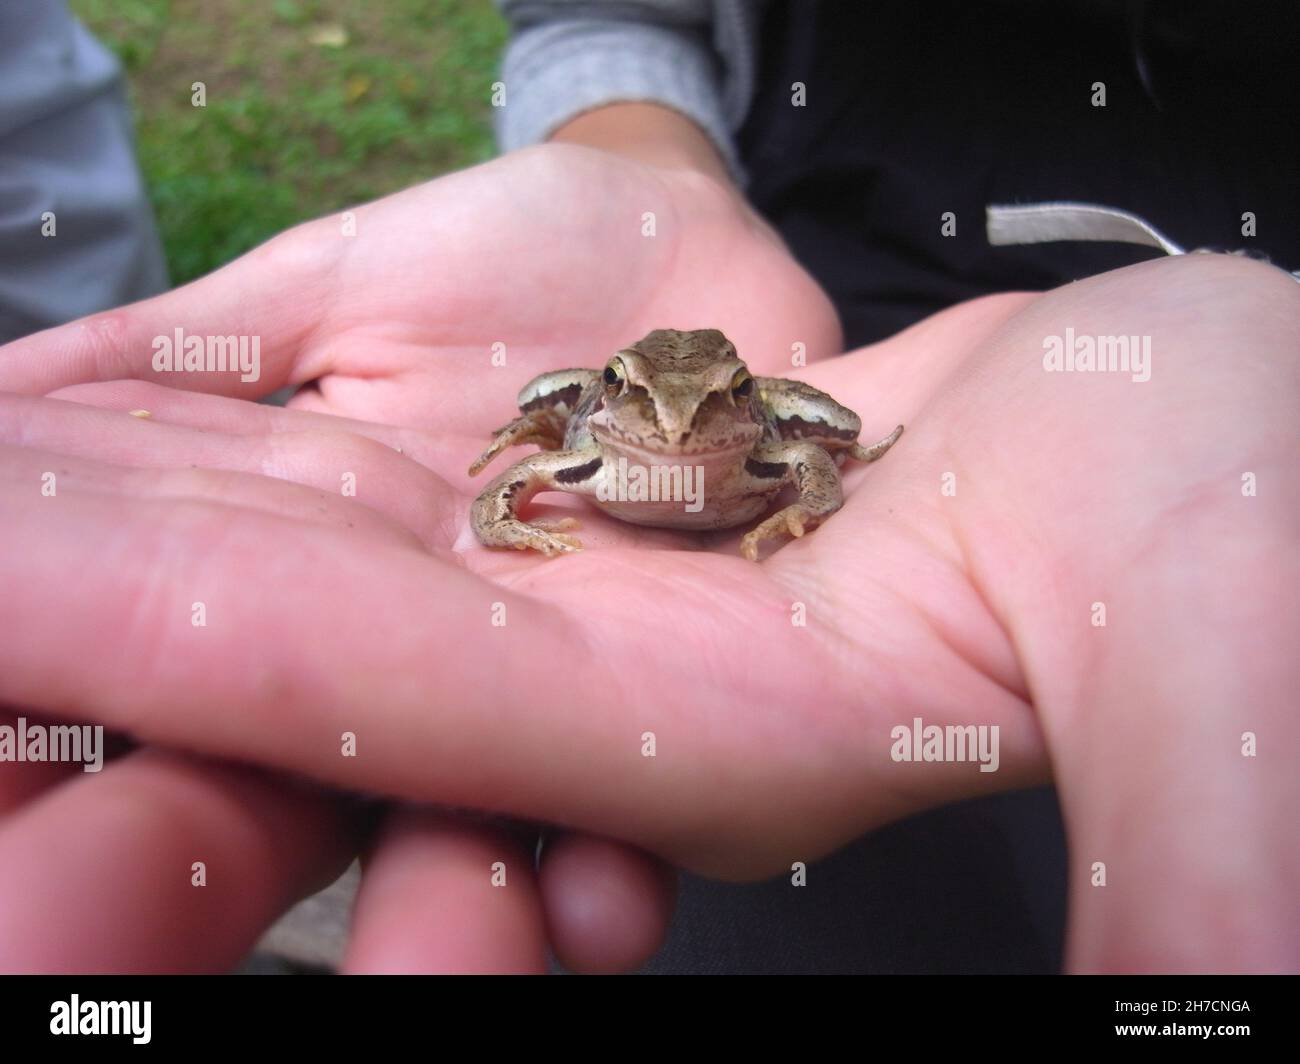 common frog, grass frog (Rana temporaria), in a hand, front view, Germany Stock Photo